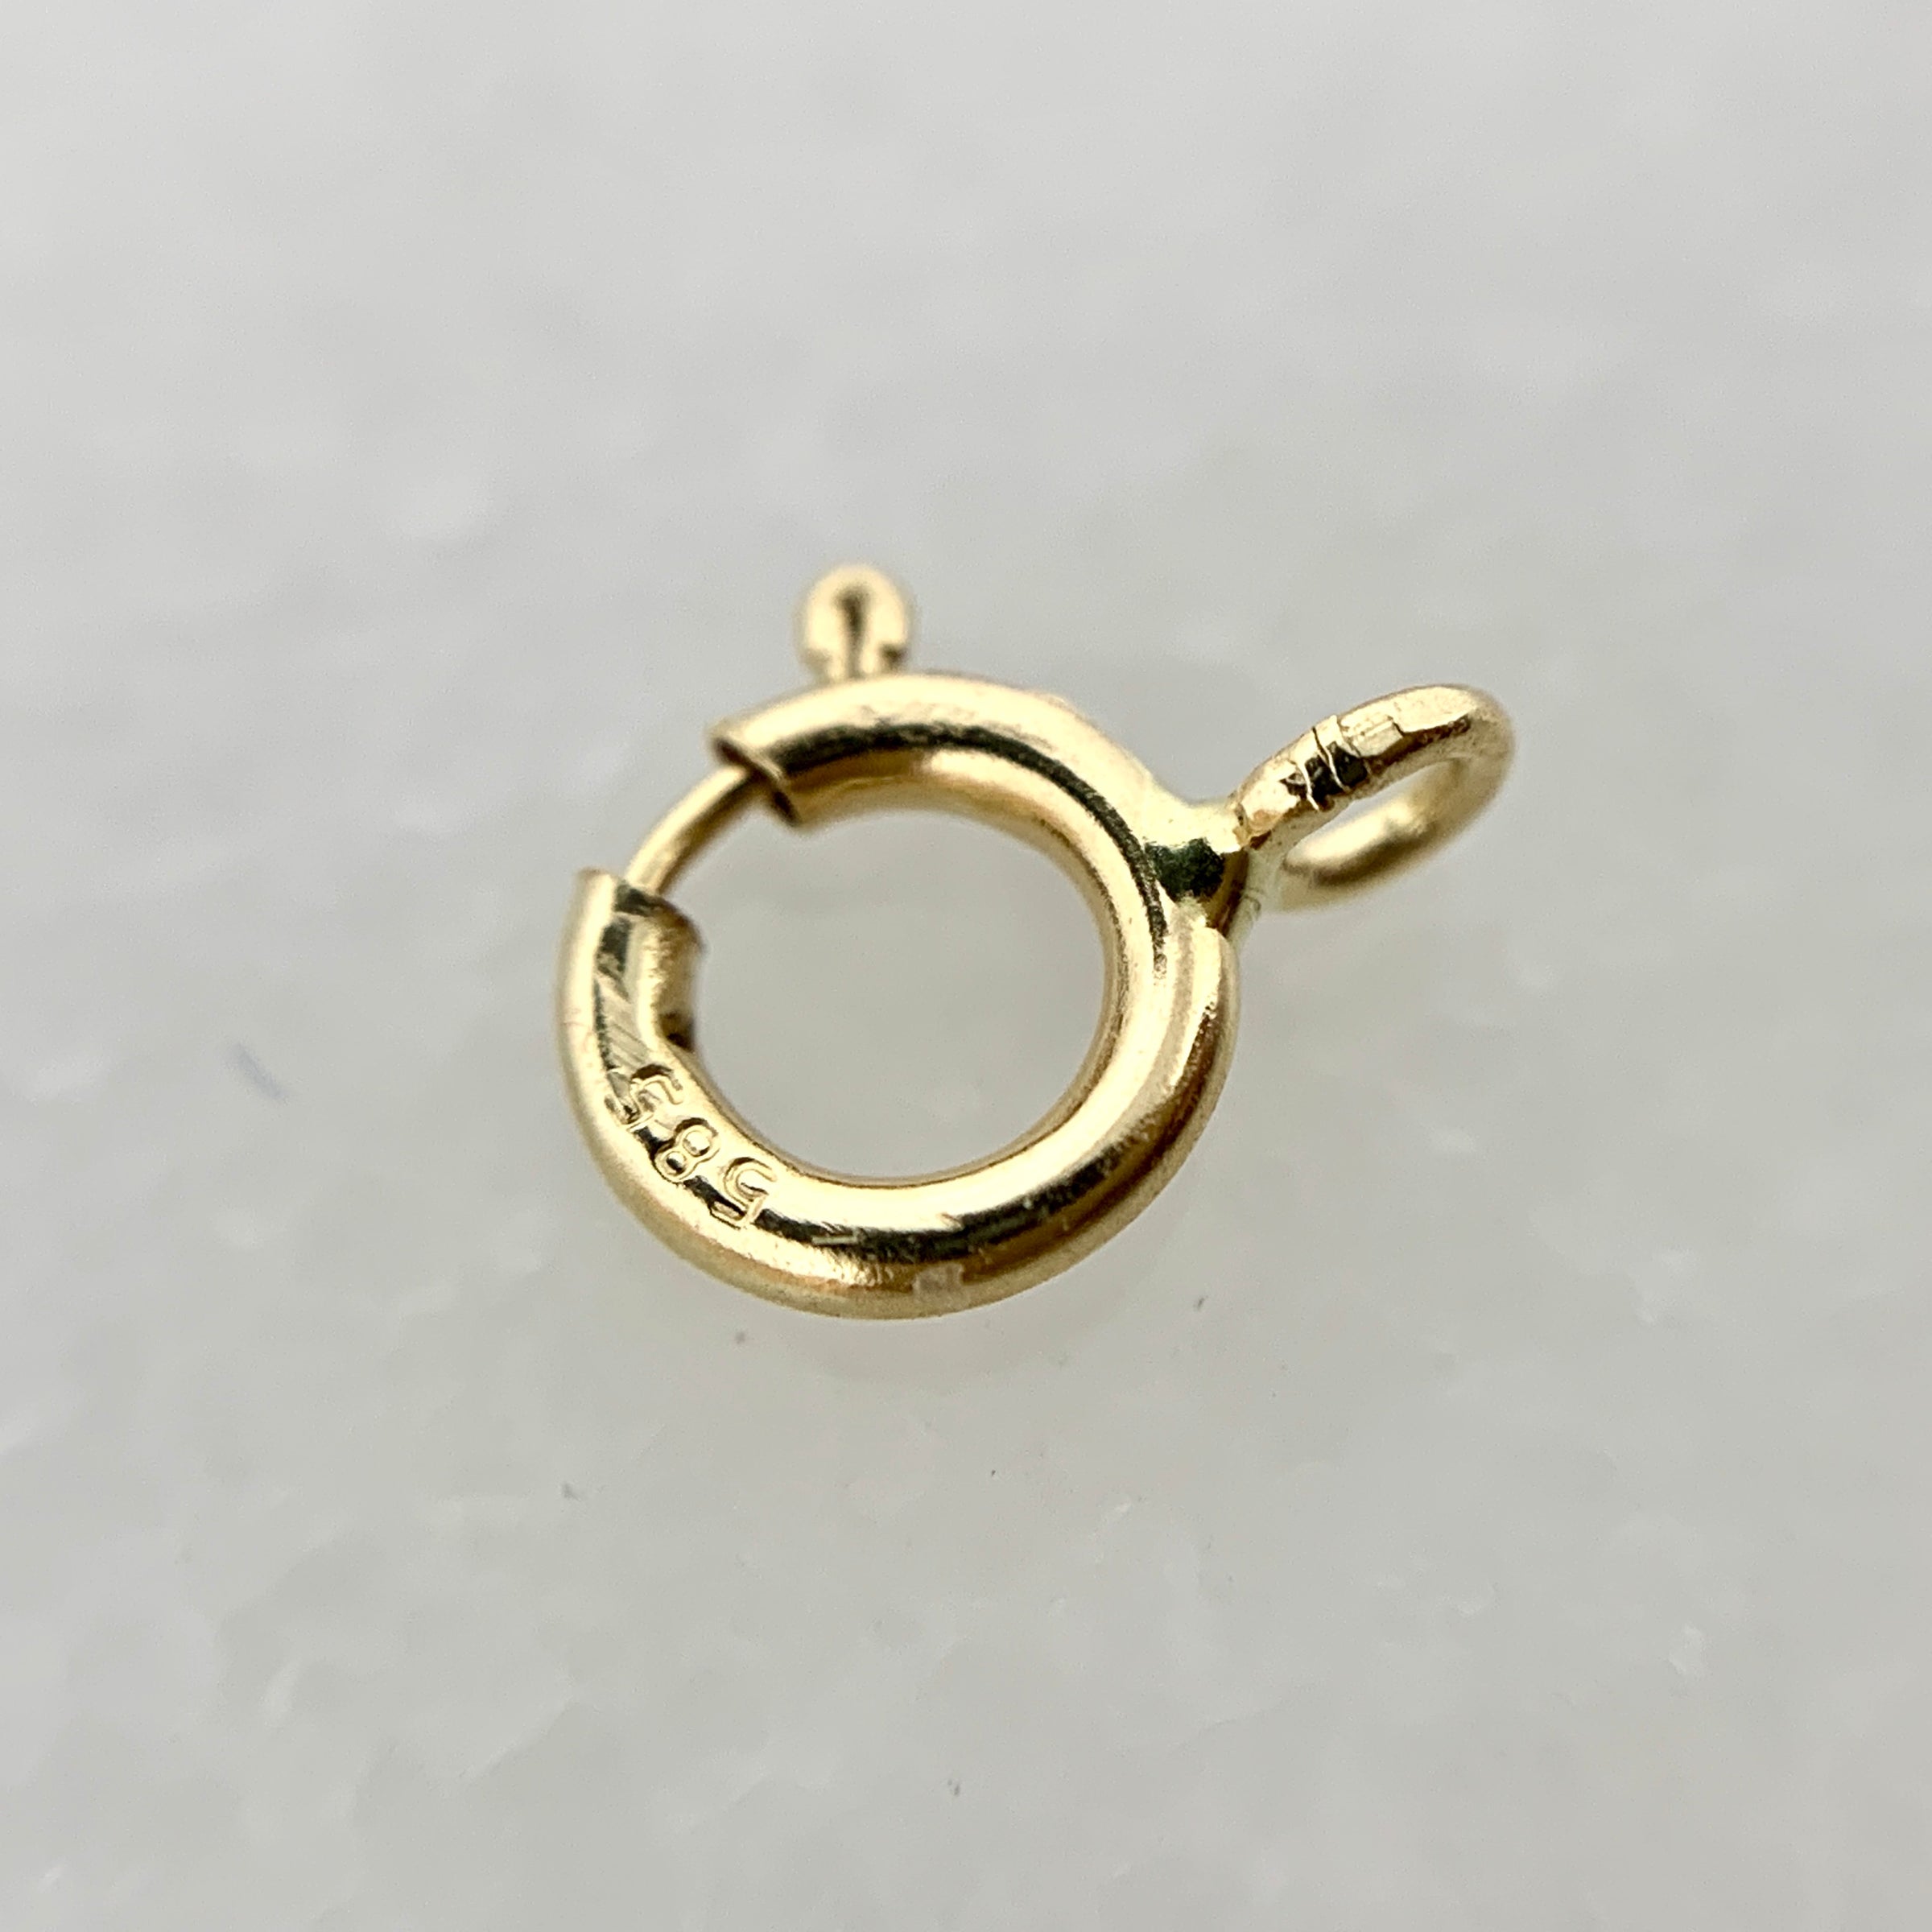 14K Gold Spring Ring Clasp with Open Ring For Necklace/Bracelet